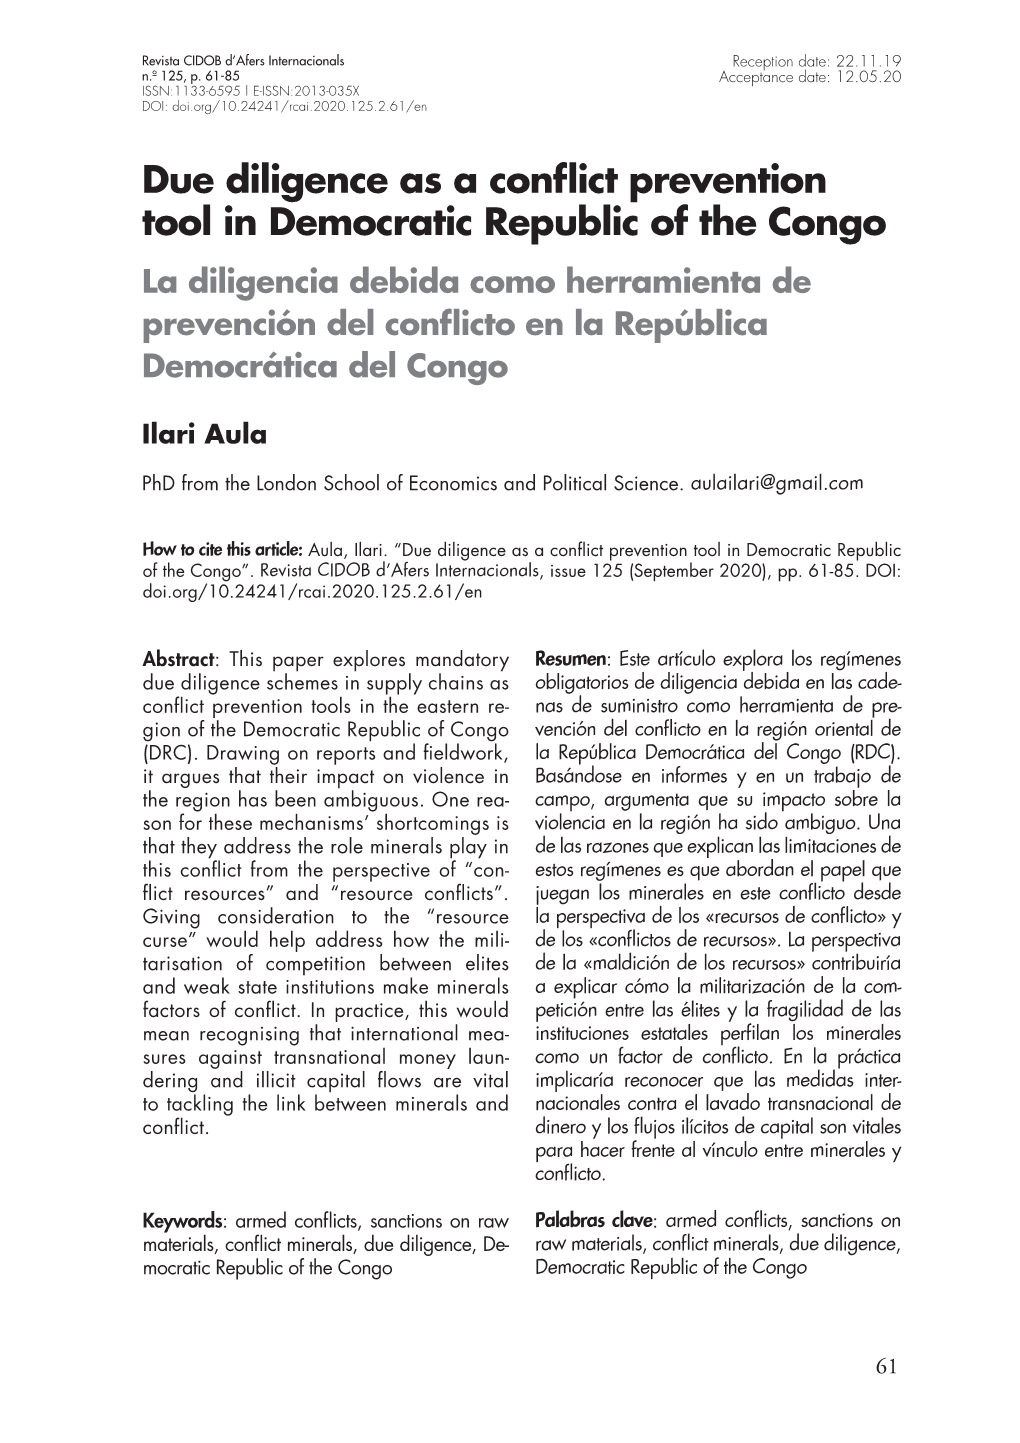 Due Diligence As a Conflict Prevention Tool in Democratic Republic of The